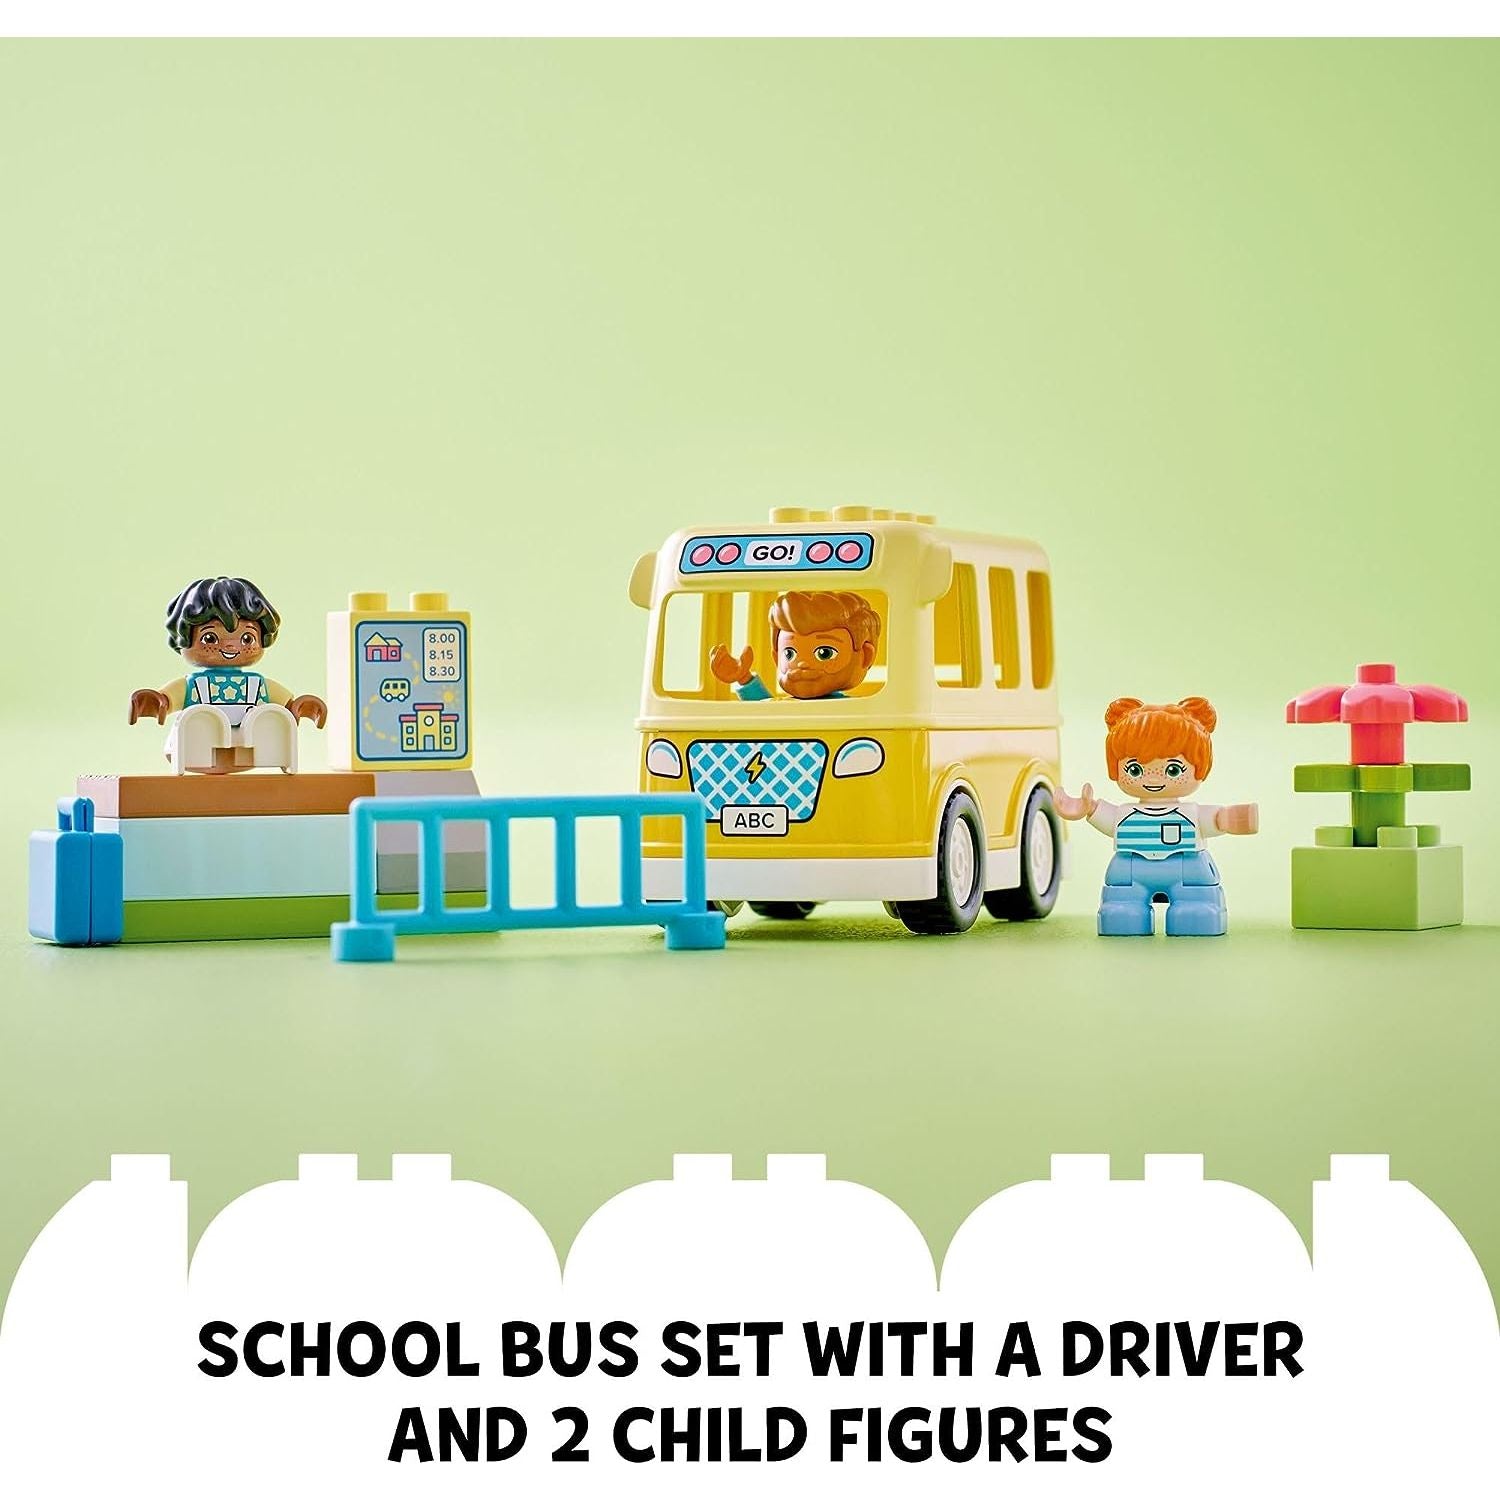 LEGO 10988  DUPLO Town Bus Ride Educational STEM Building Toy Set for Preschool Kids Hands on Learning About Catching The Bus to Day Care and Making Friends